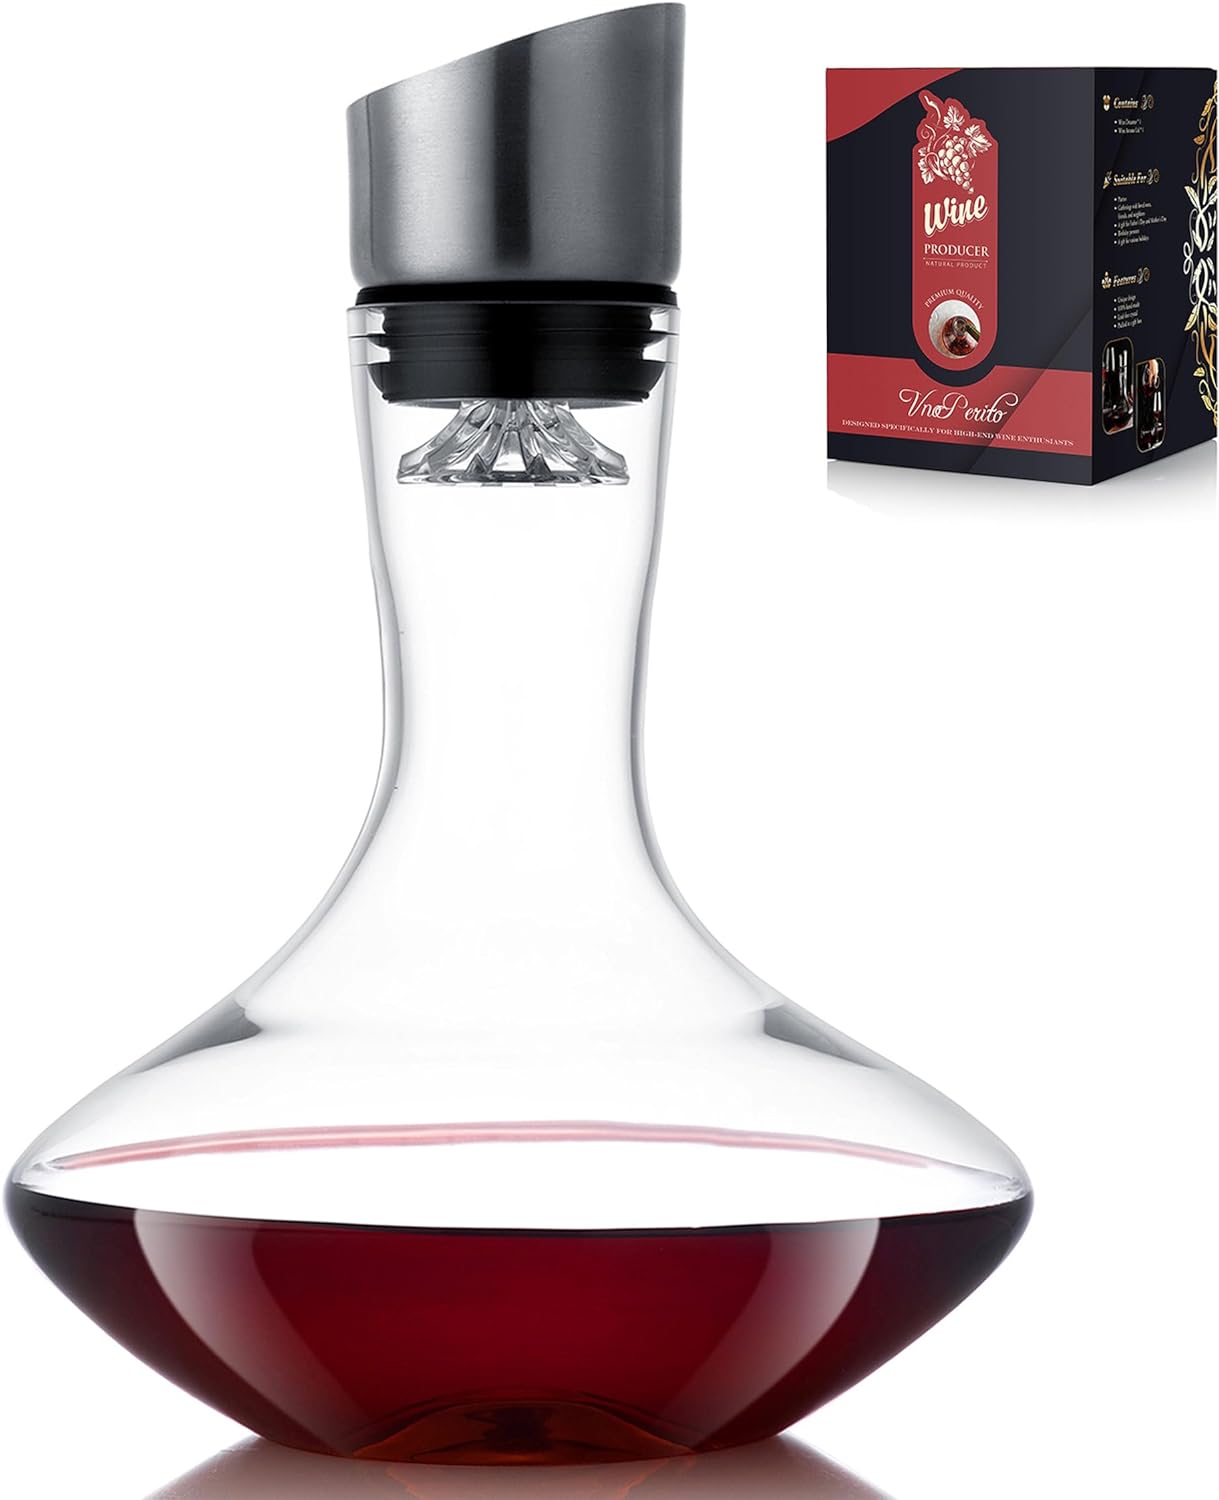 VnoPerito Wine Decanter,Red Wine Carafe,Decanter with Built-in Aerator Pourer, 100% Hand Blown Lead-free Crystal Glass with Stainless Steel Pourer Lid, Filter, Wine Gifts for Men